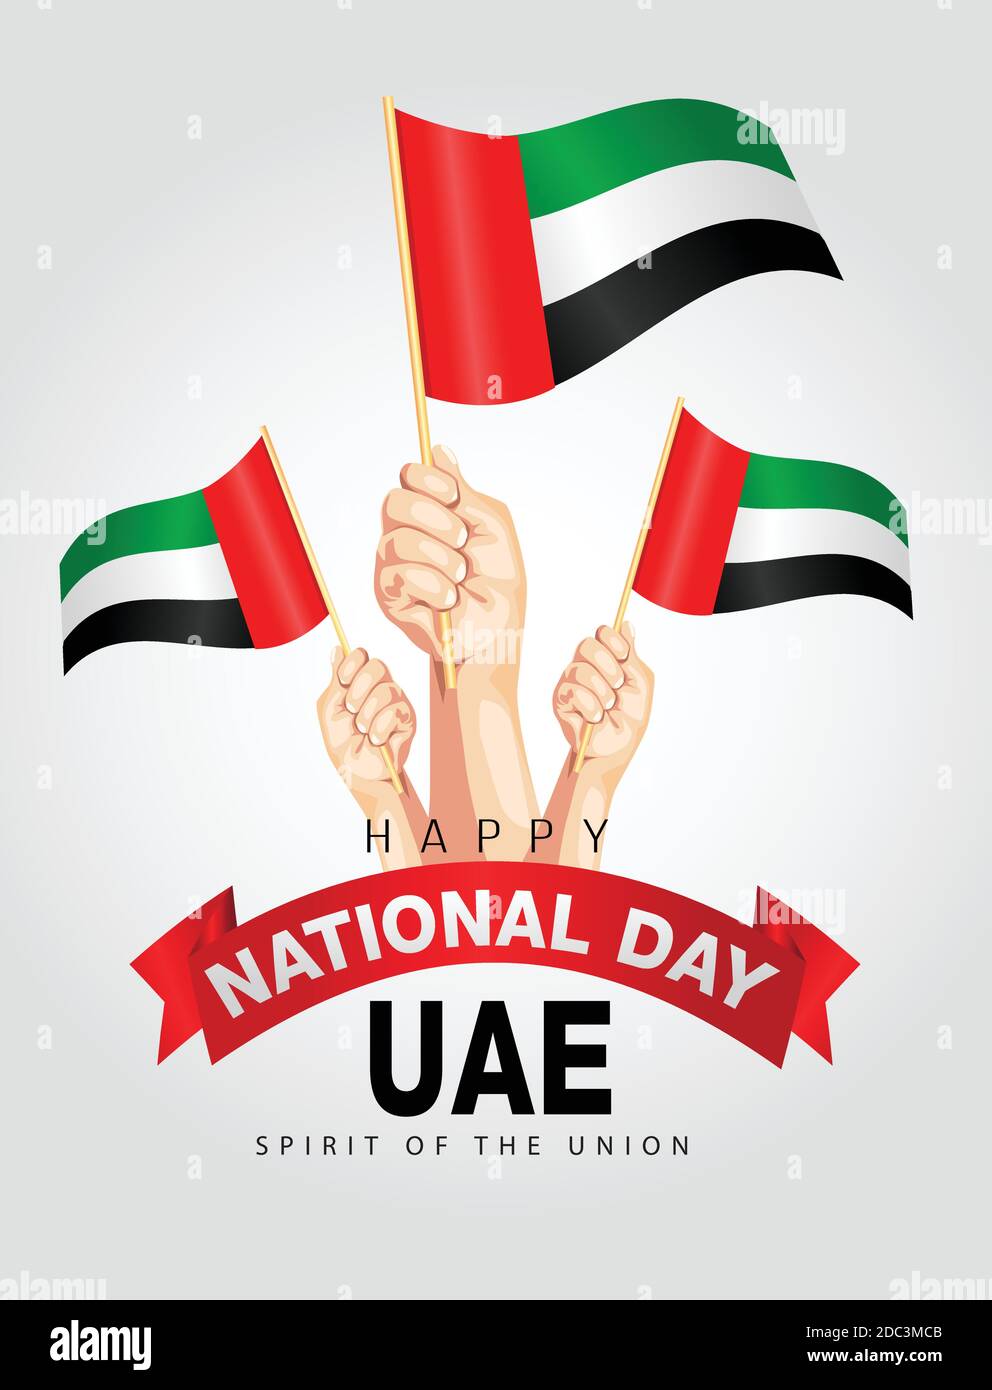 Uae National Day Nd December With Hand Holding Flags Vector Illustration Stock Vector Image